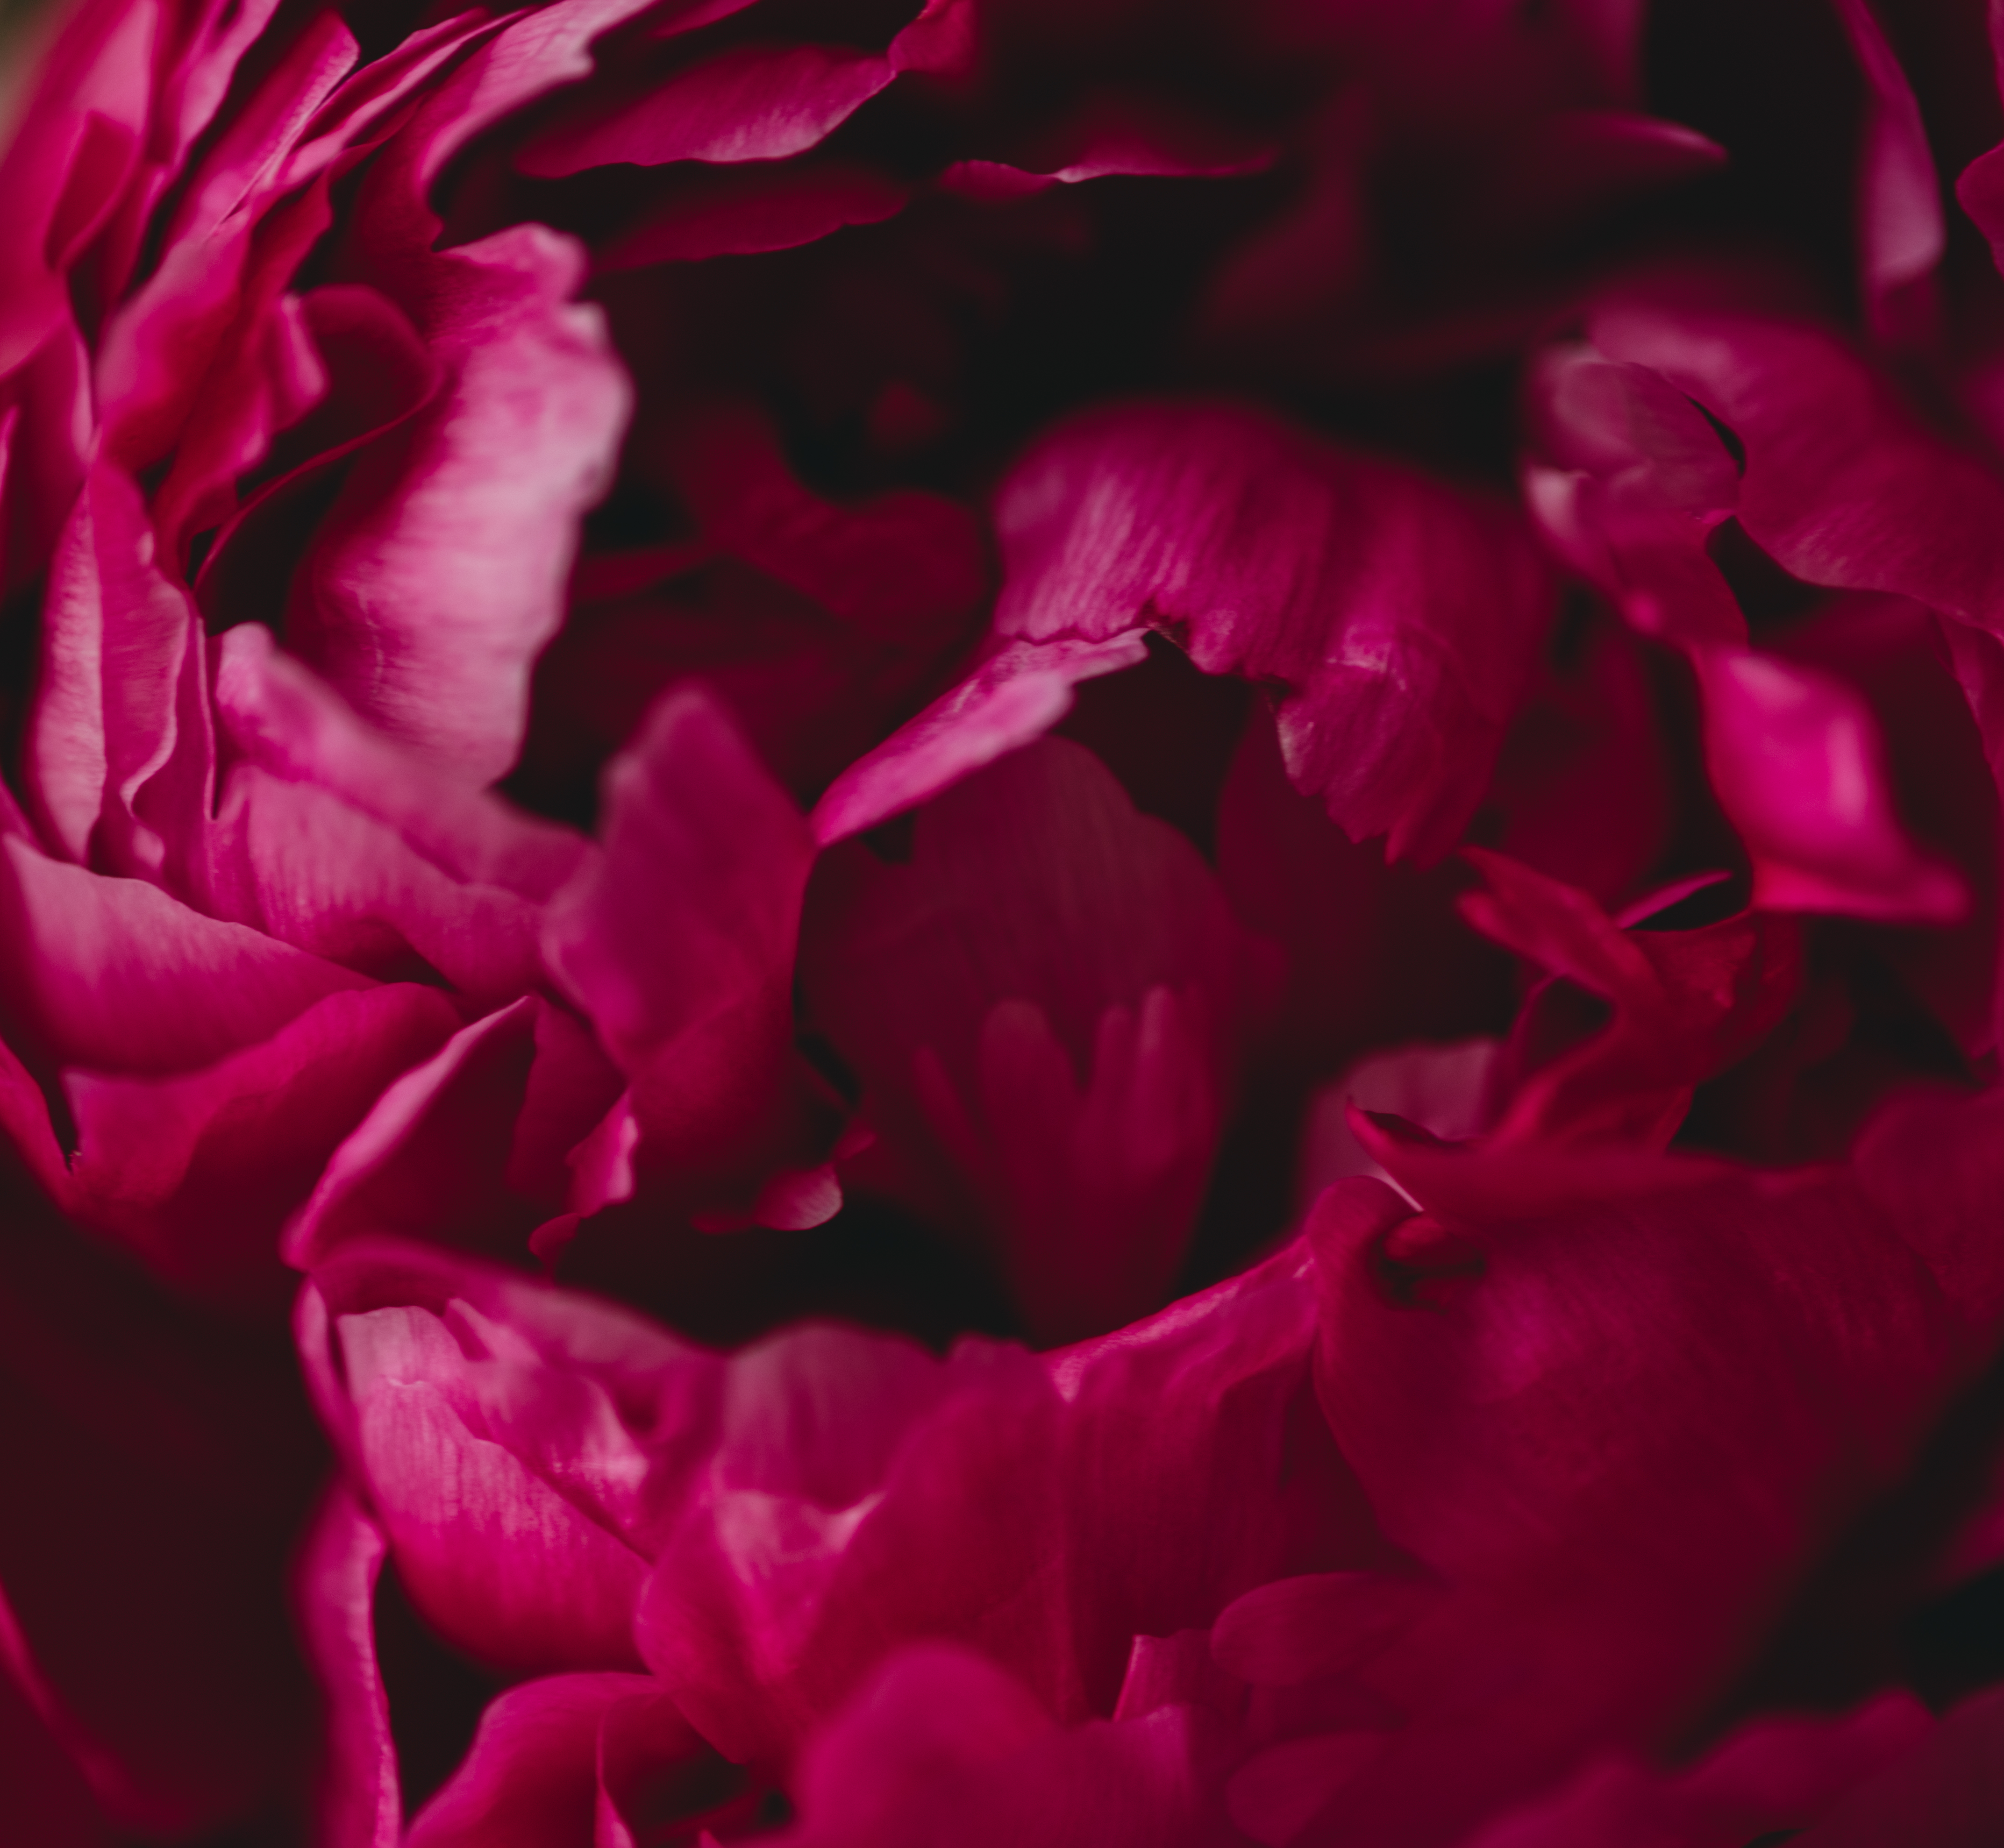 this is a picture of a close up of a magenta peony flower